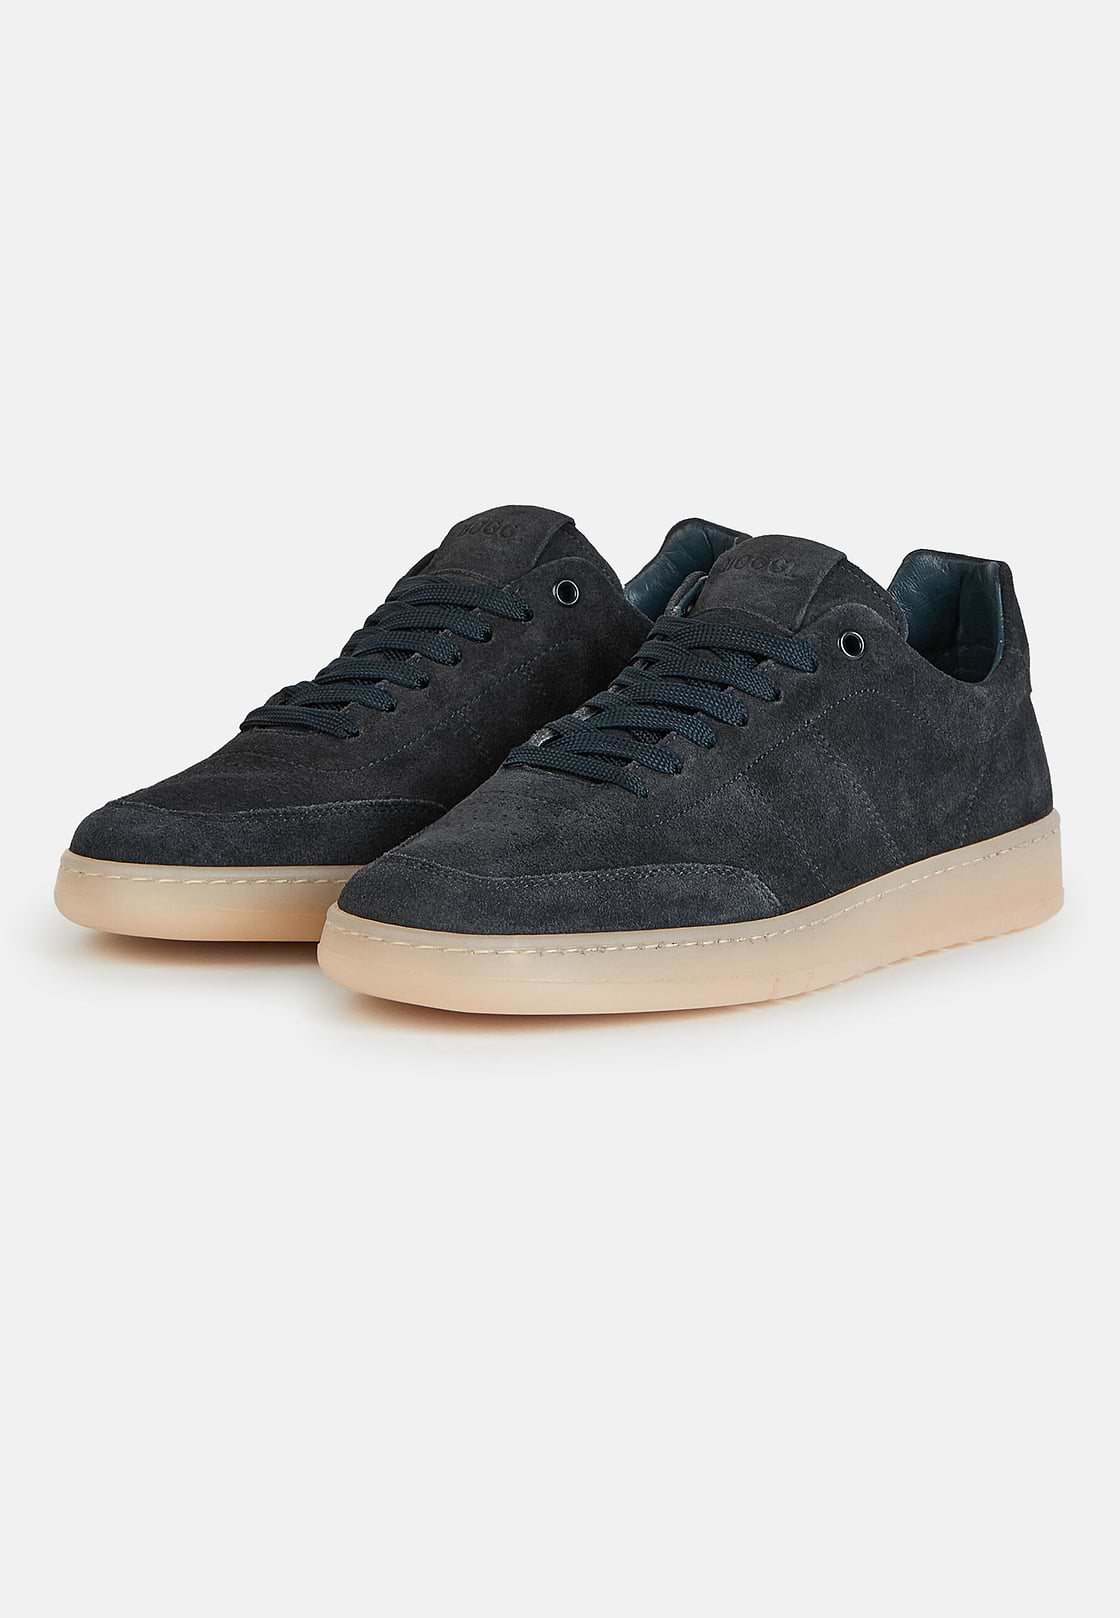 Navy Blue Suede Trainers, Navy blue, hi-res